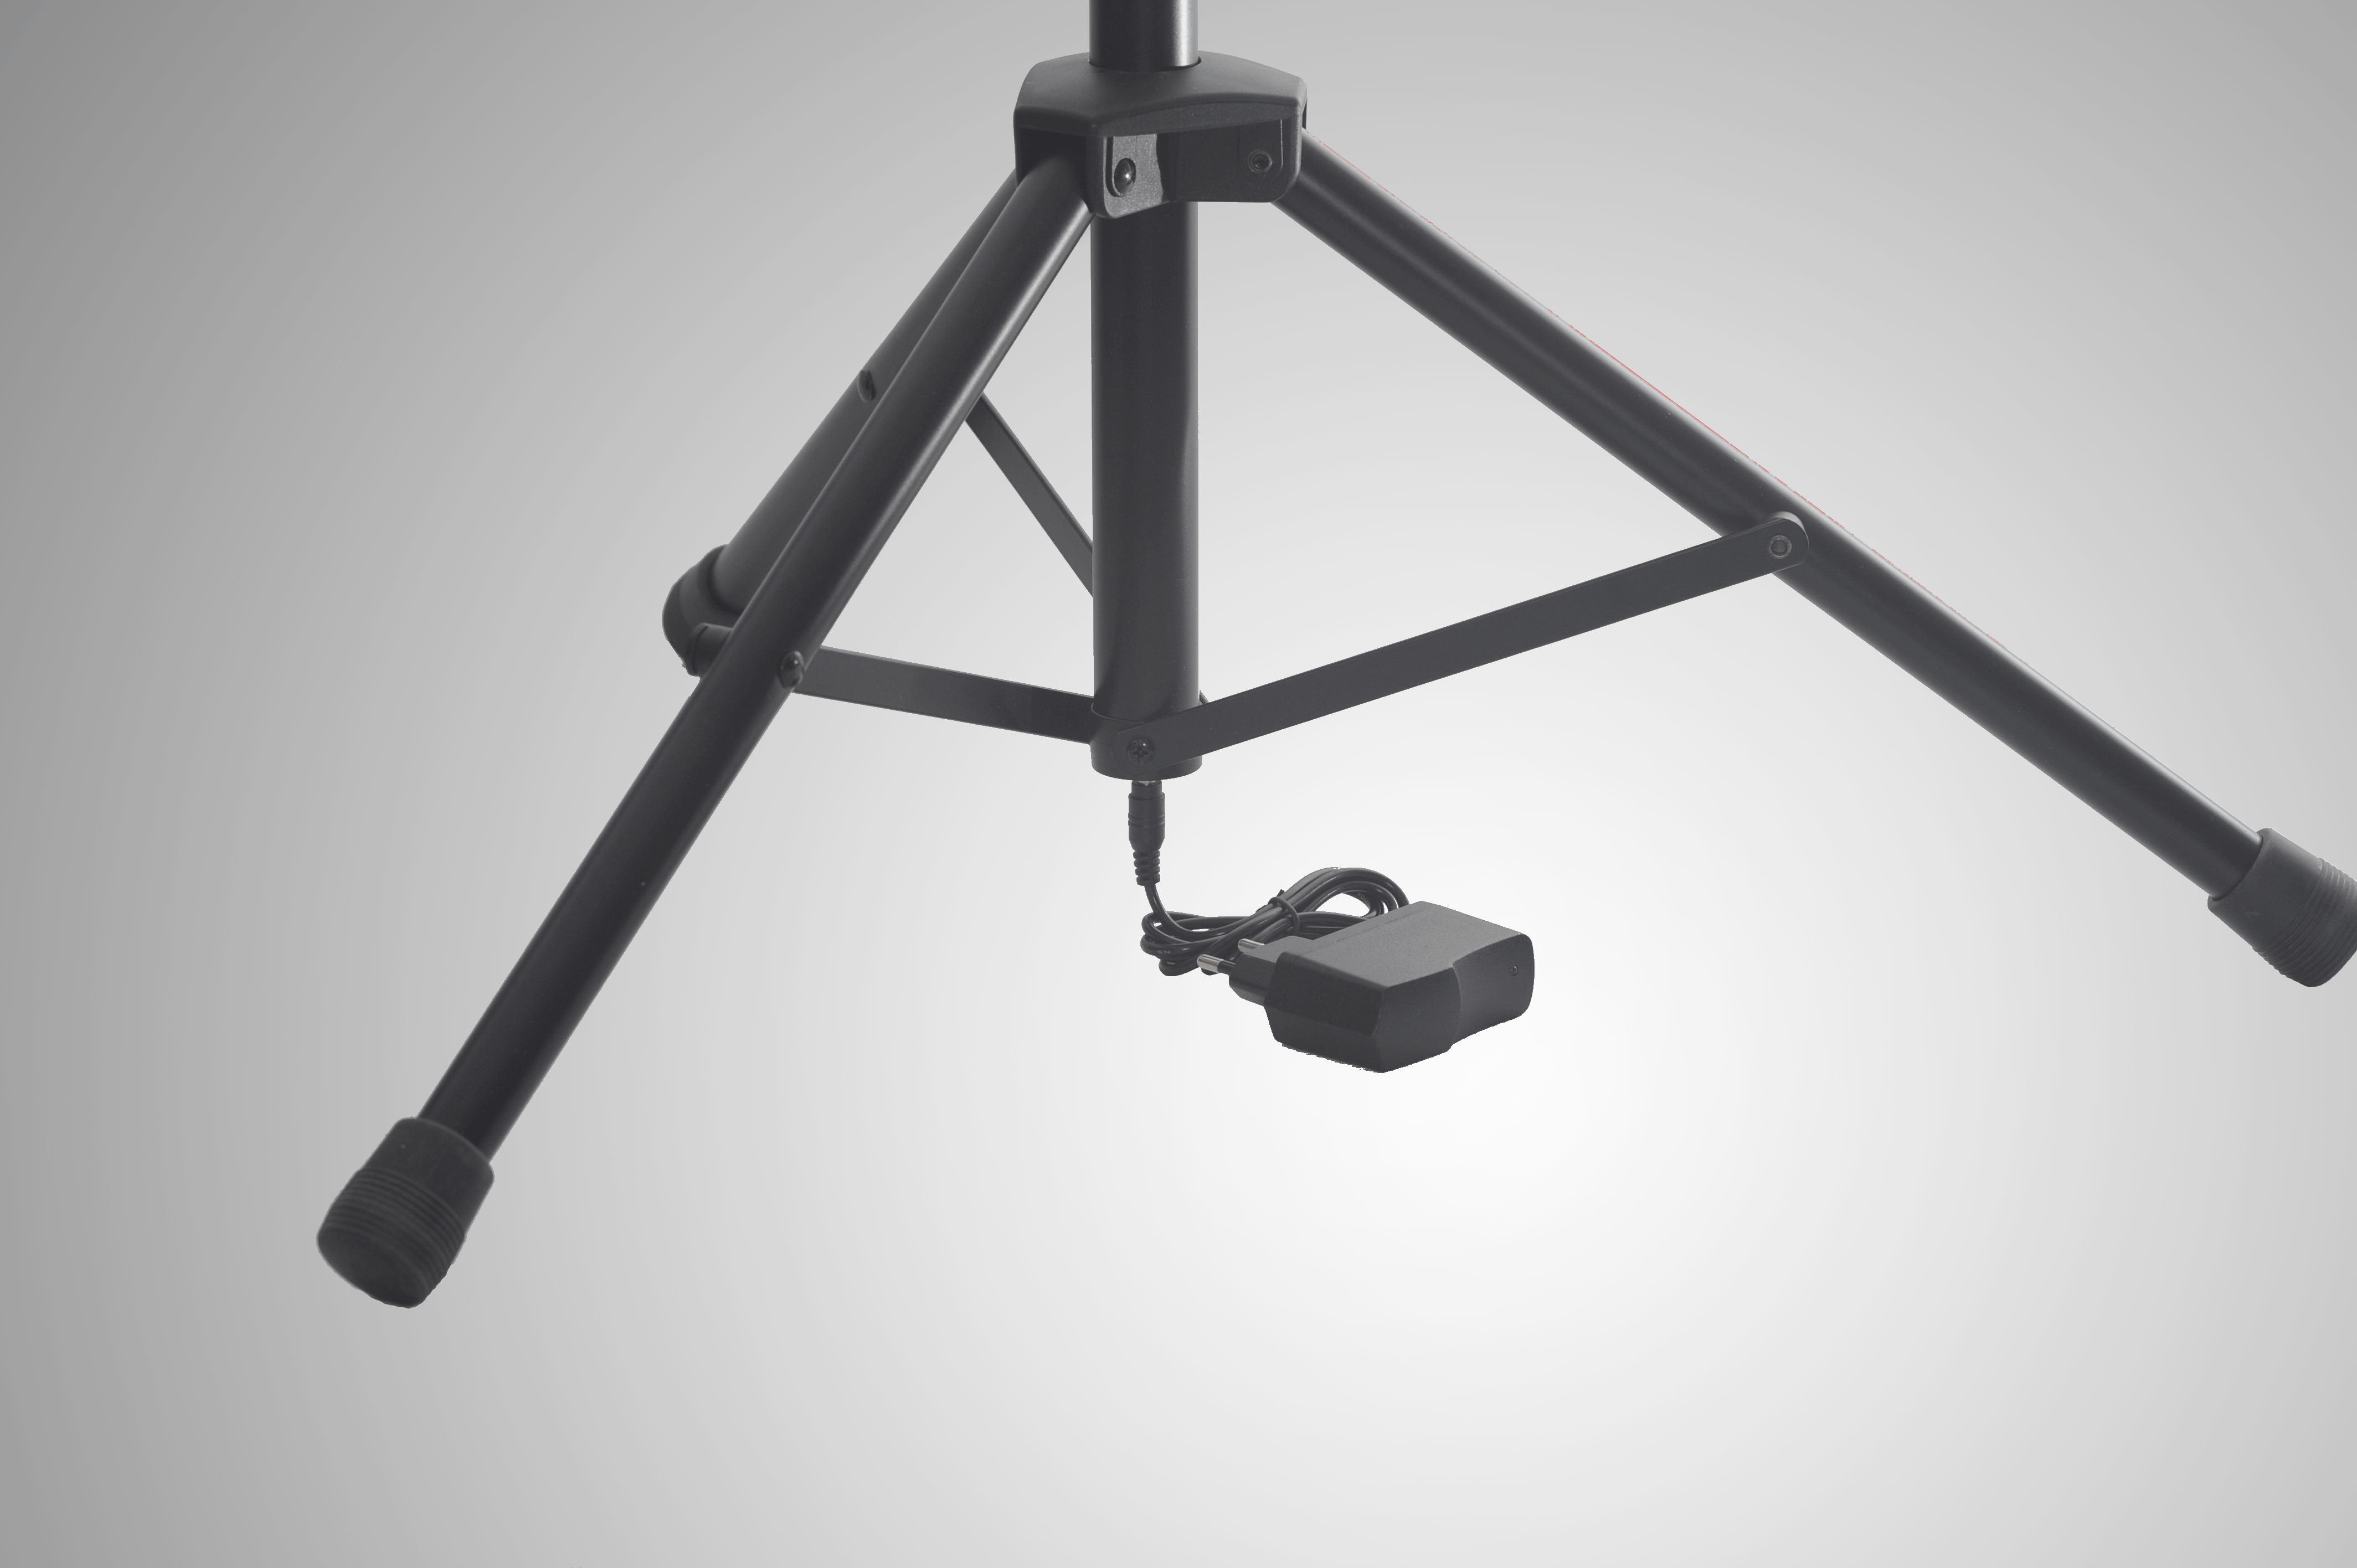 Scora PowerStand charges your tablet on the stand